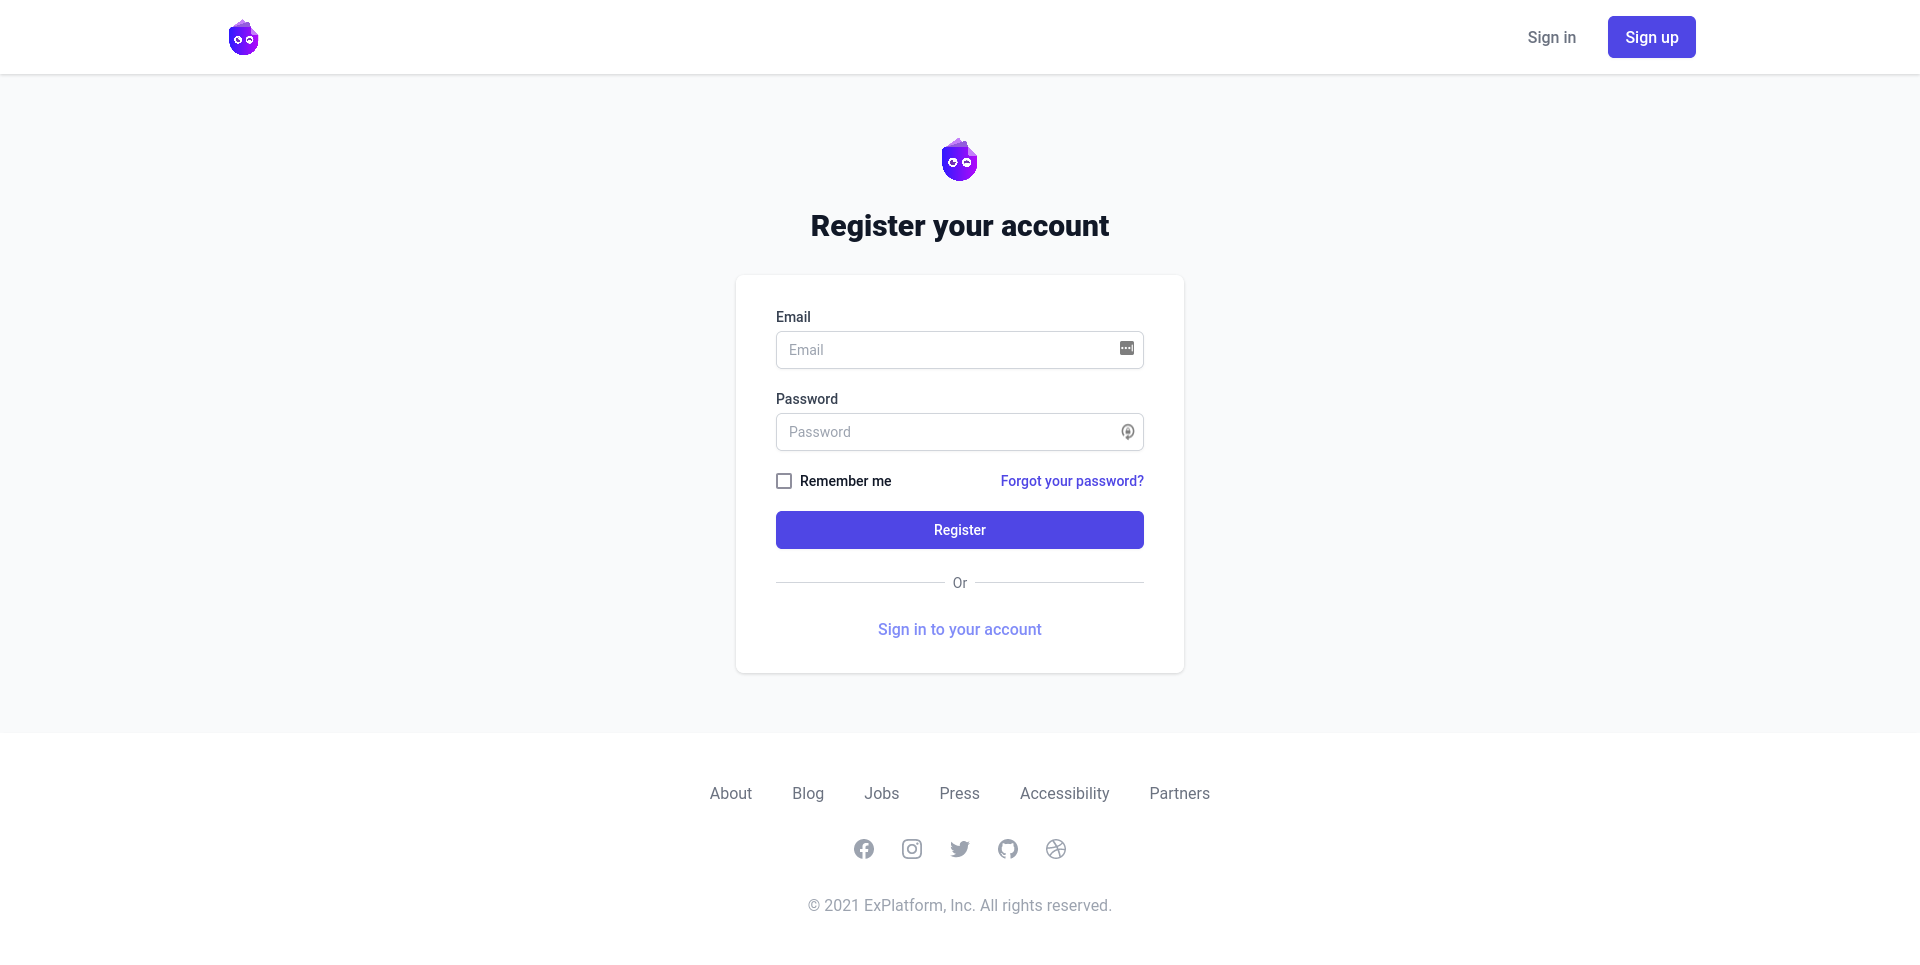 An image of the signup page showing a login field and a password field